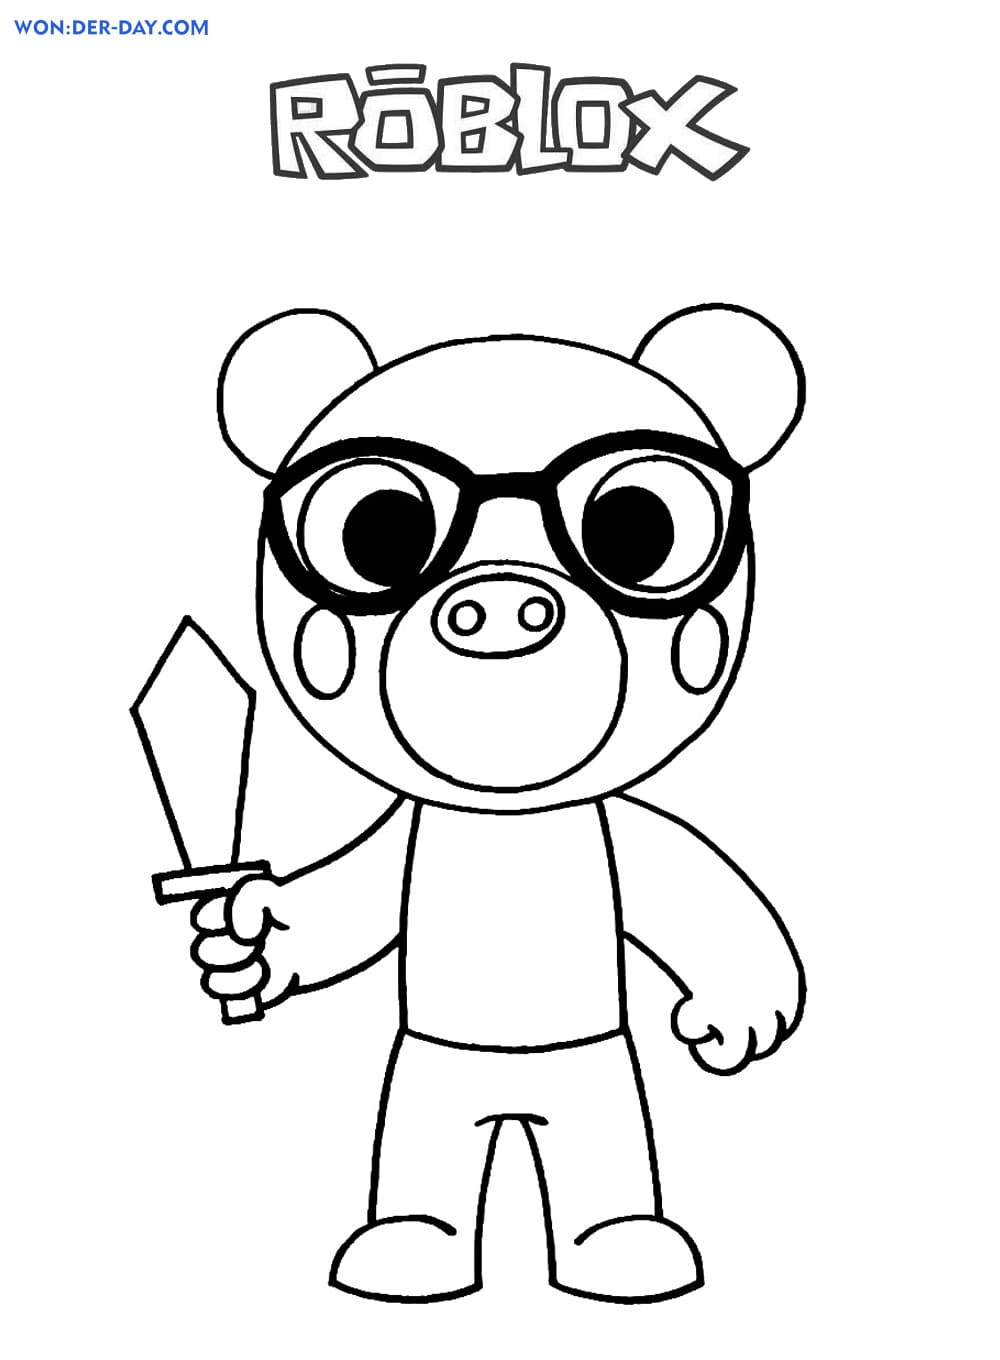 Piggy Roblox coloring pages WONDER DAY — Coloring pages for children